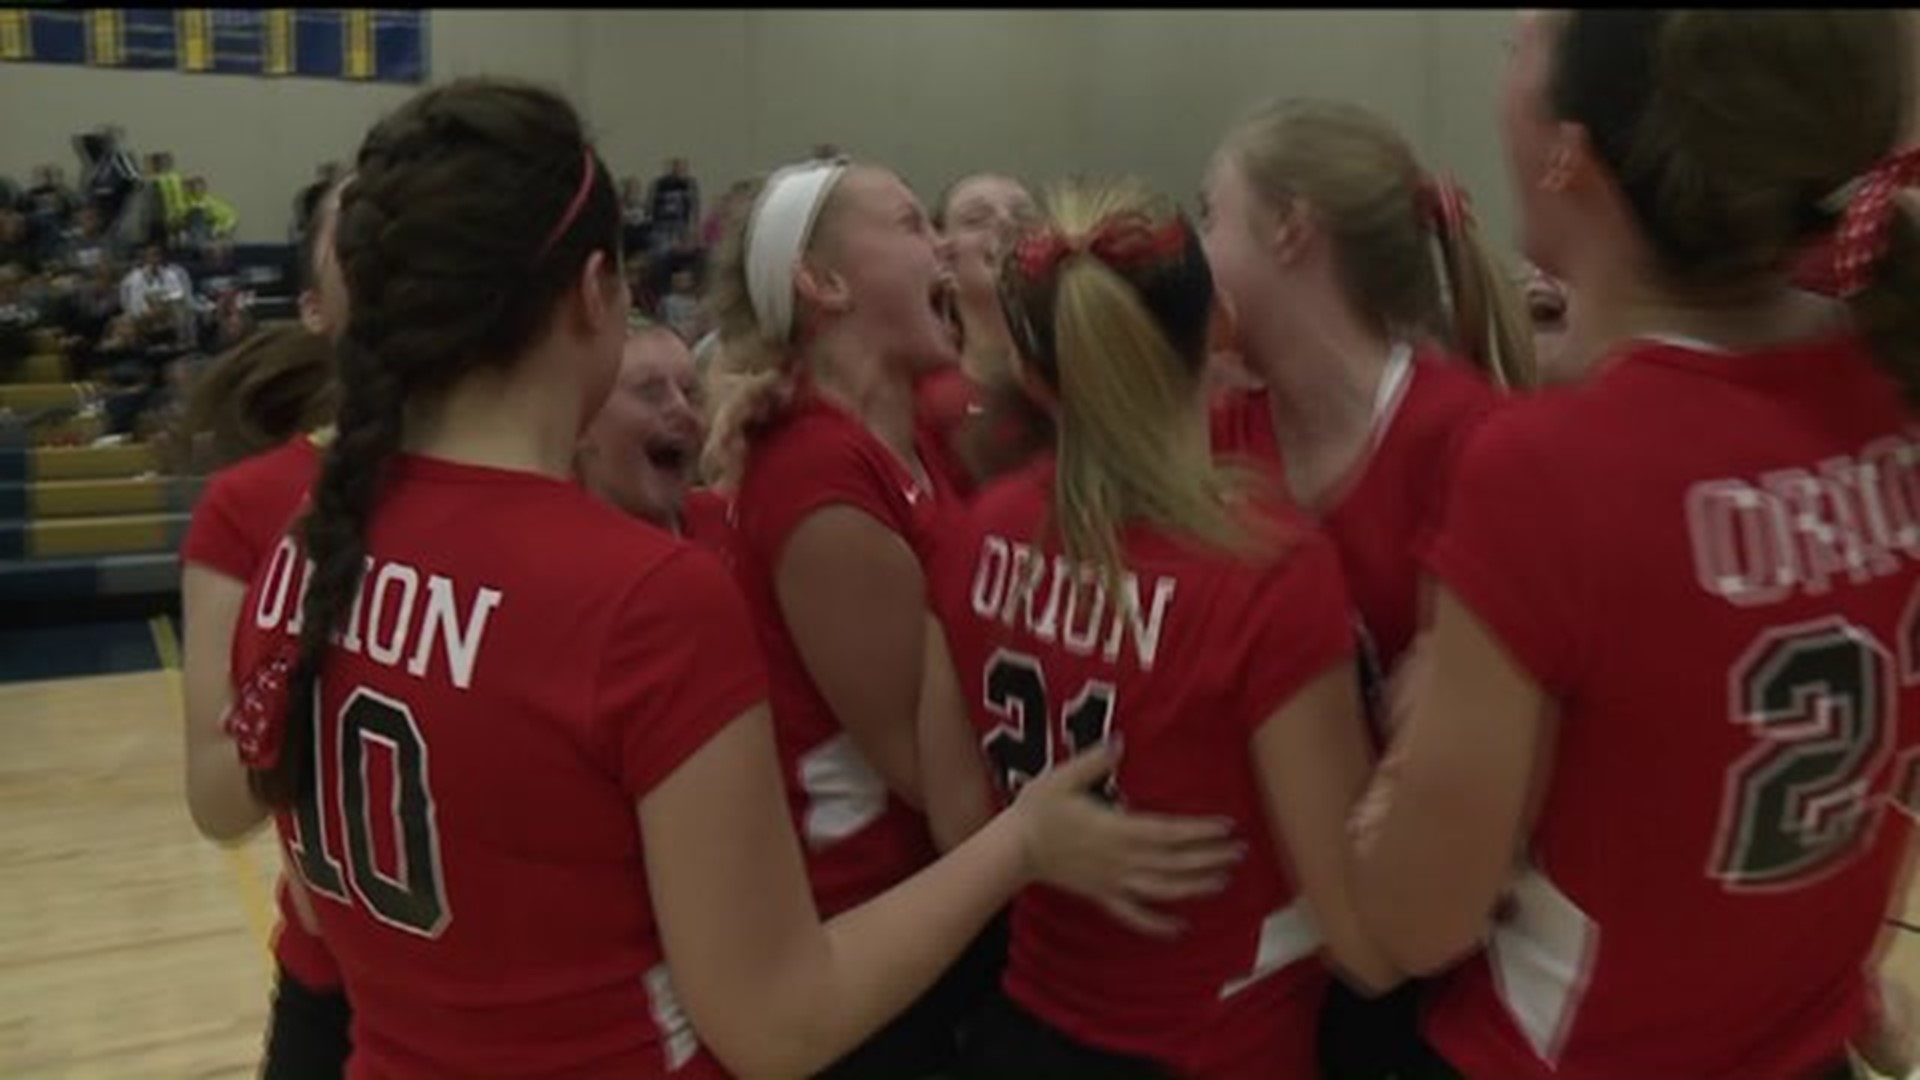 Orion Sweeps Fieldcrest to advance to Super Sect`l